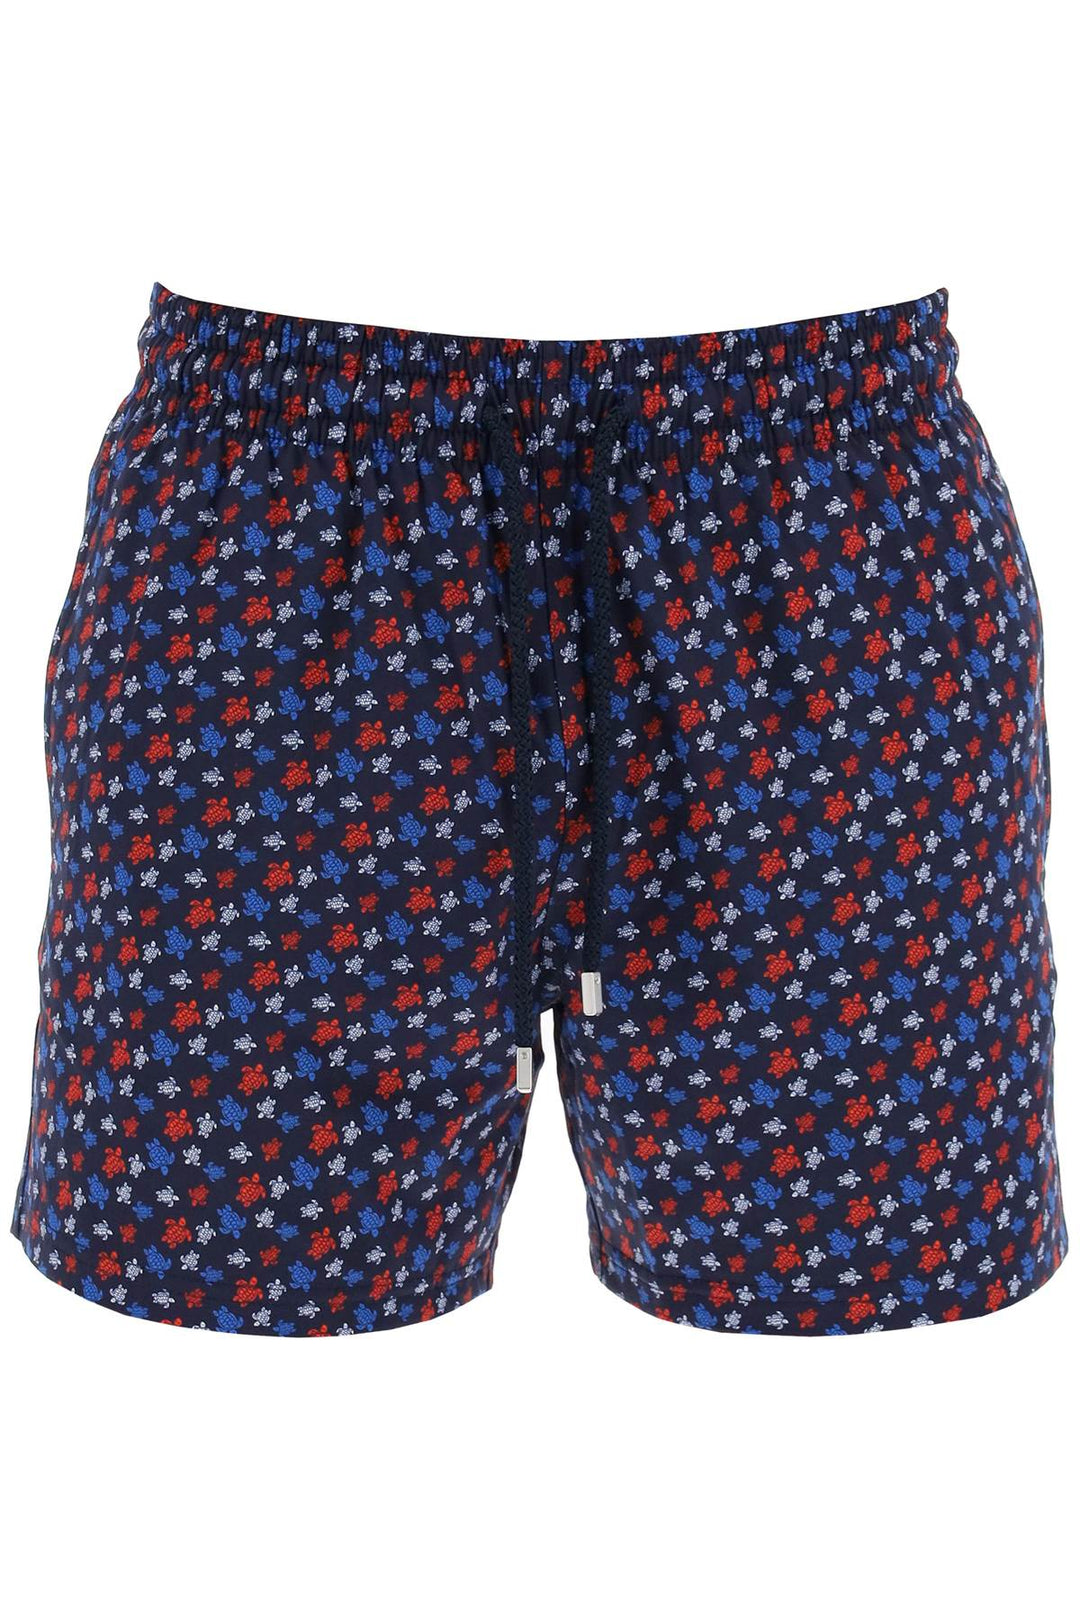 Vilebrequin Replace With Double Quoterainbow Round Micro Sea Turtle Bermuda Shorts   Blu